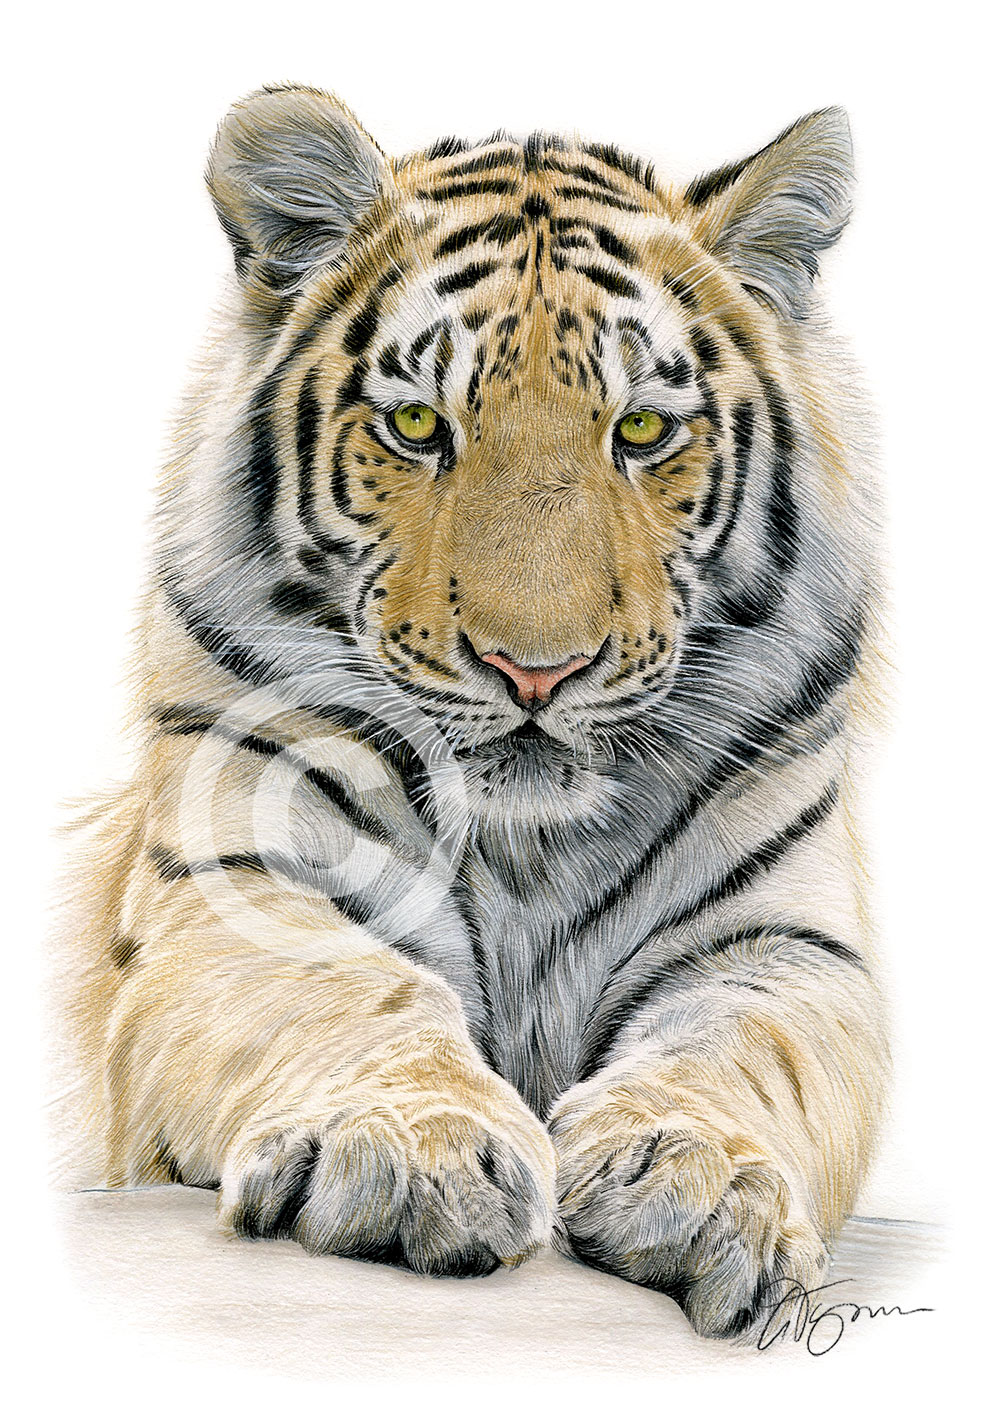 Colour pencil drawing of a Bengal Tiger by artist Gary Tymon